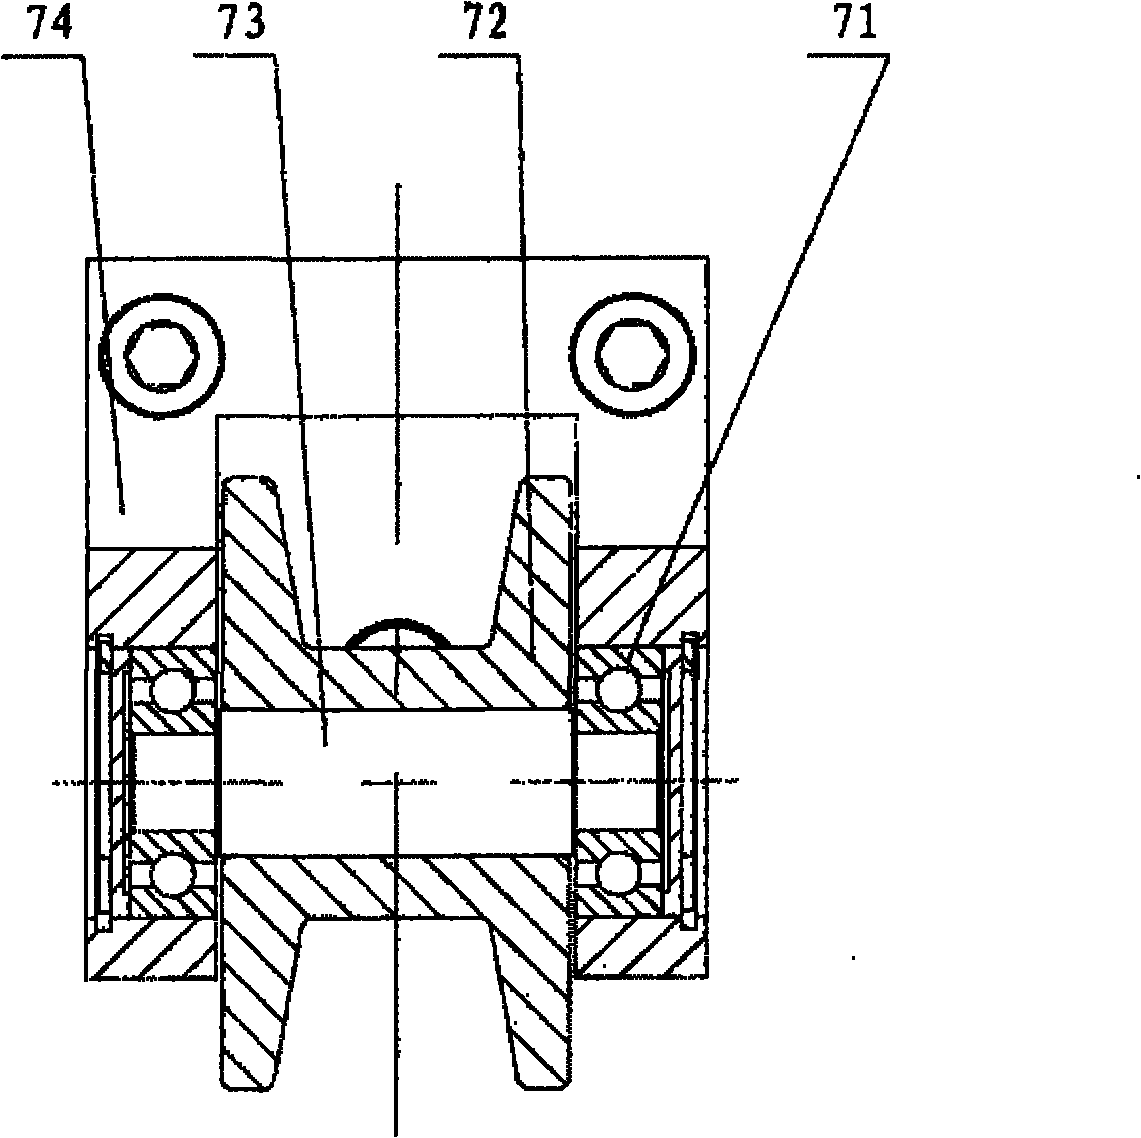 Welding tractor with steel structure being subjected to gas shielded welding